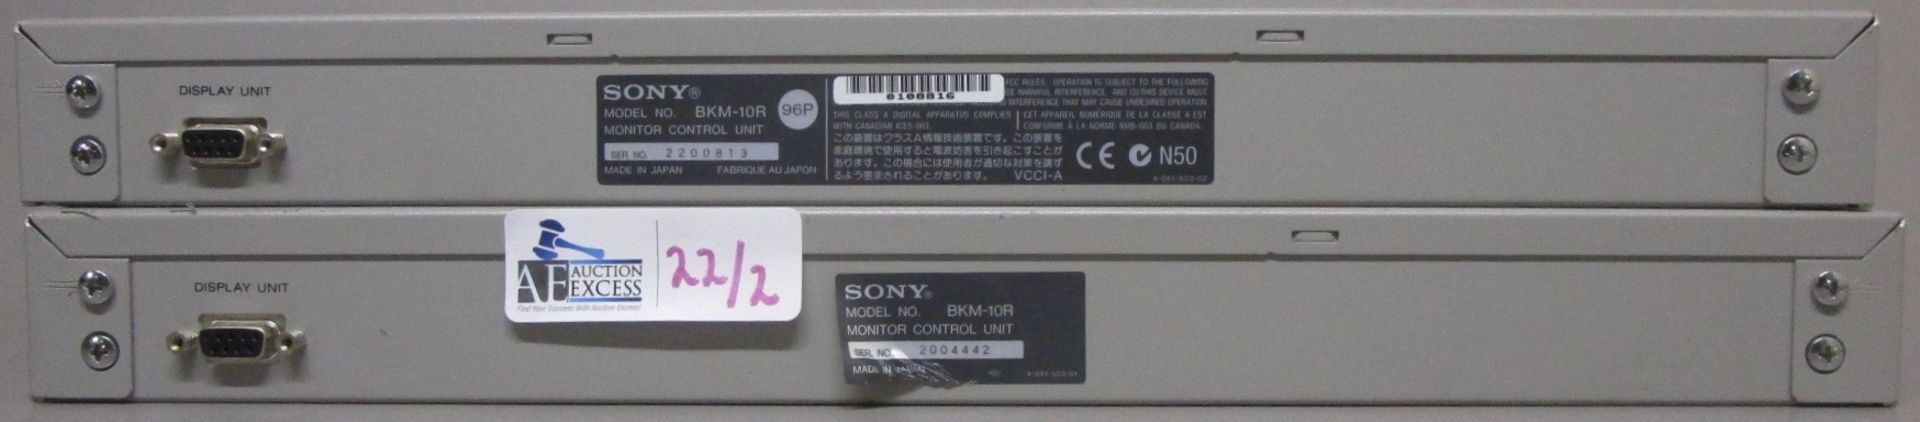 LOT OF 2 SONY BKM-10R MONITOR REMOTE CONTROLS - Image 2 of 2